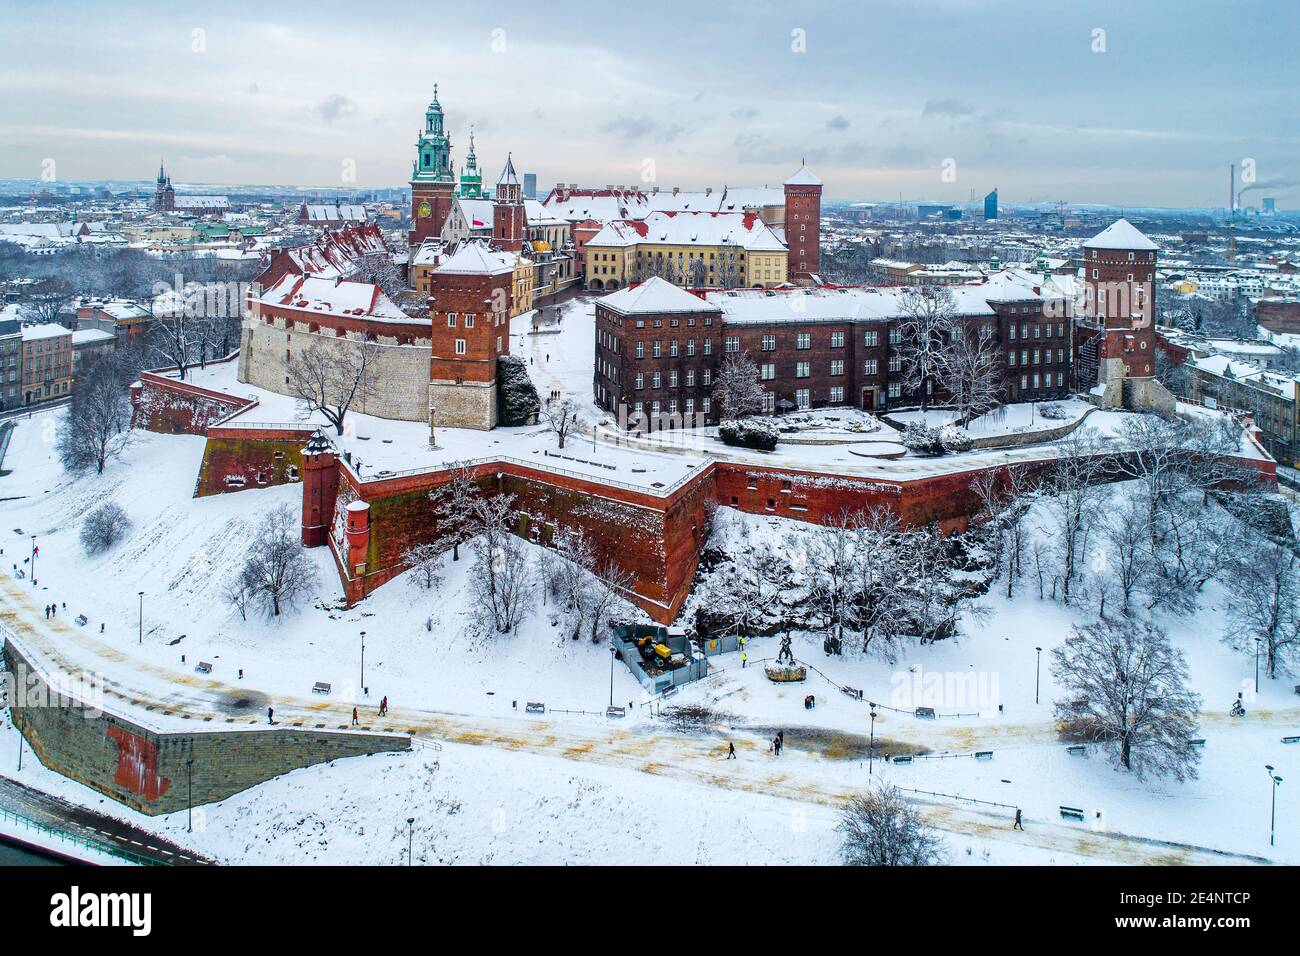 Krakow, Poland. Historic royal Wawel Castle and Cathedral in